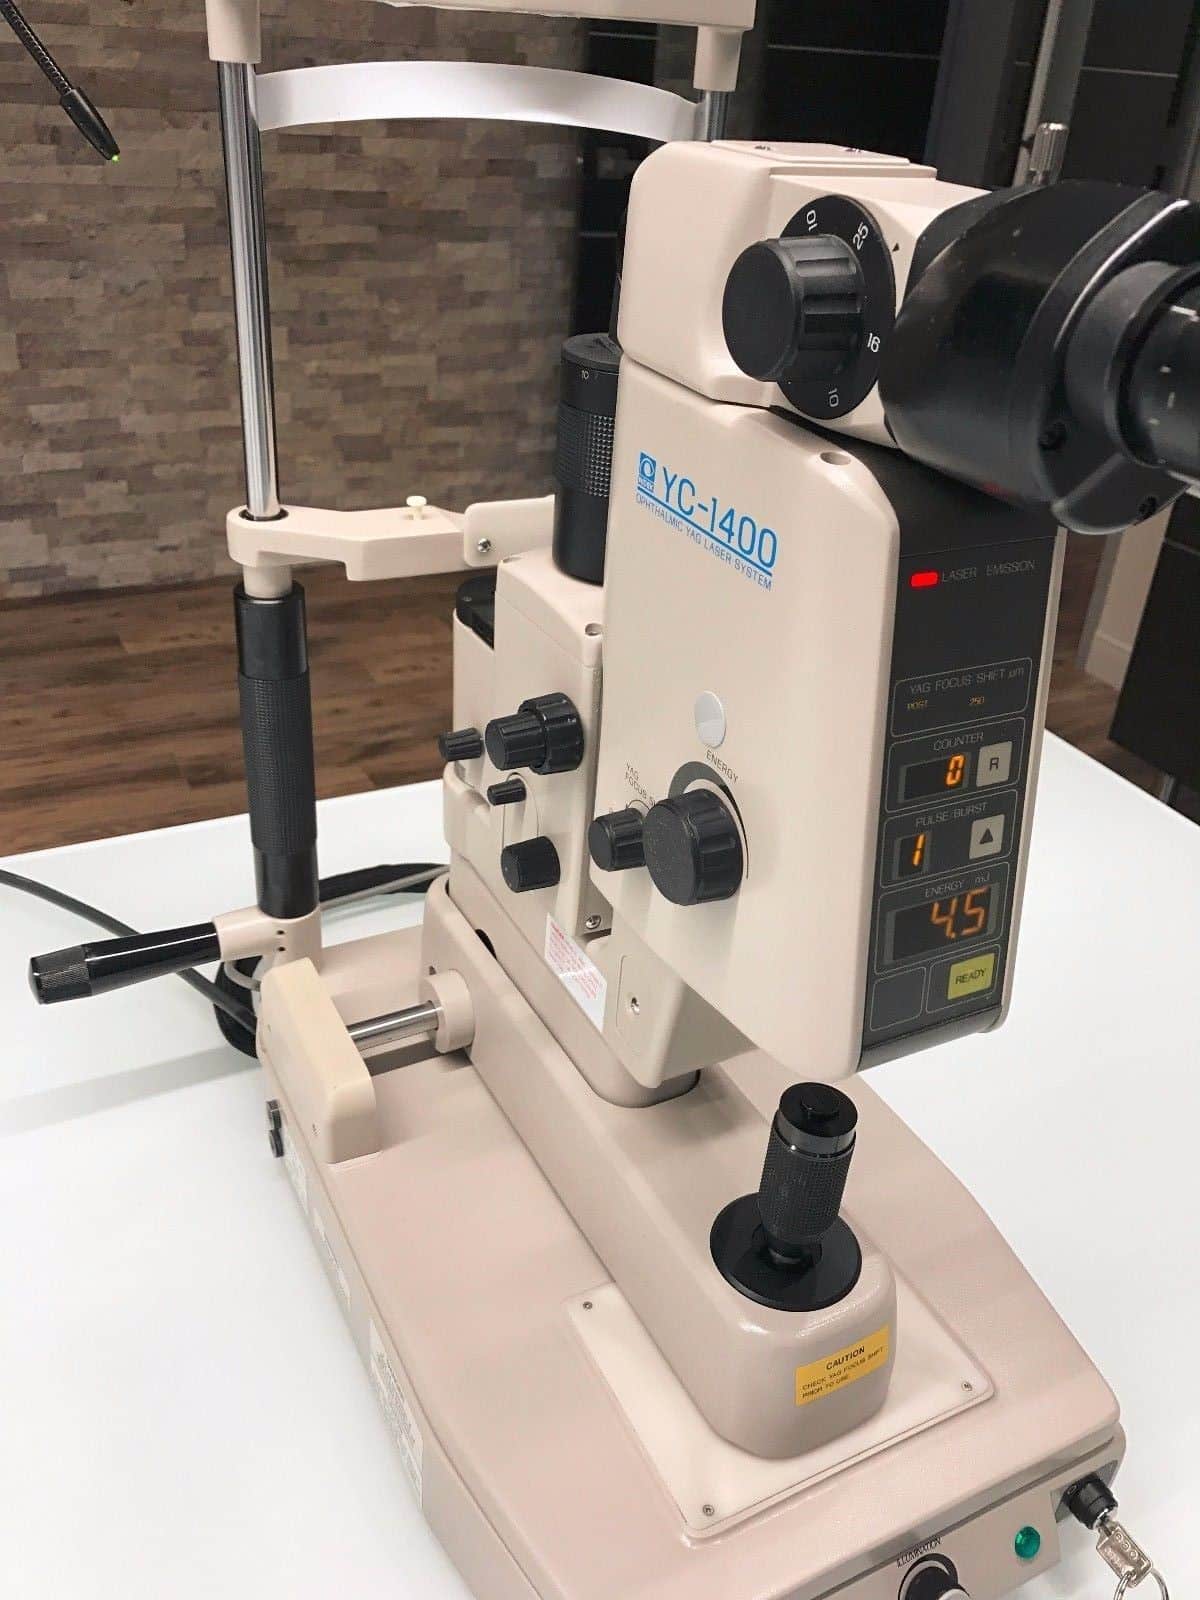 Nidek YC 1400 for sale ZEISS VISULAS Yag II Plus Laser with Power Table and Slit Lamp